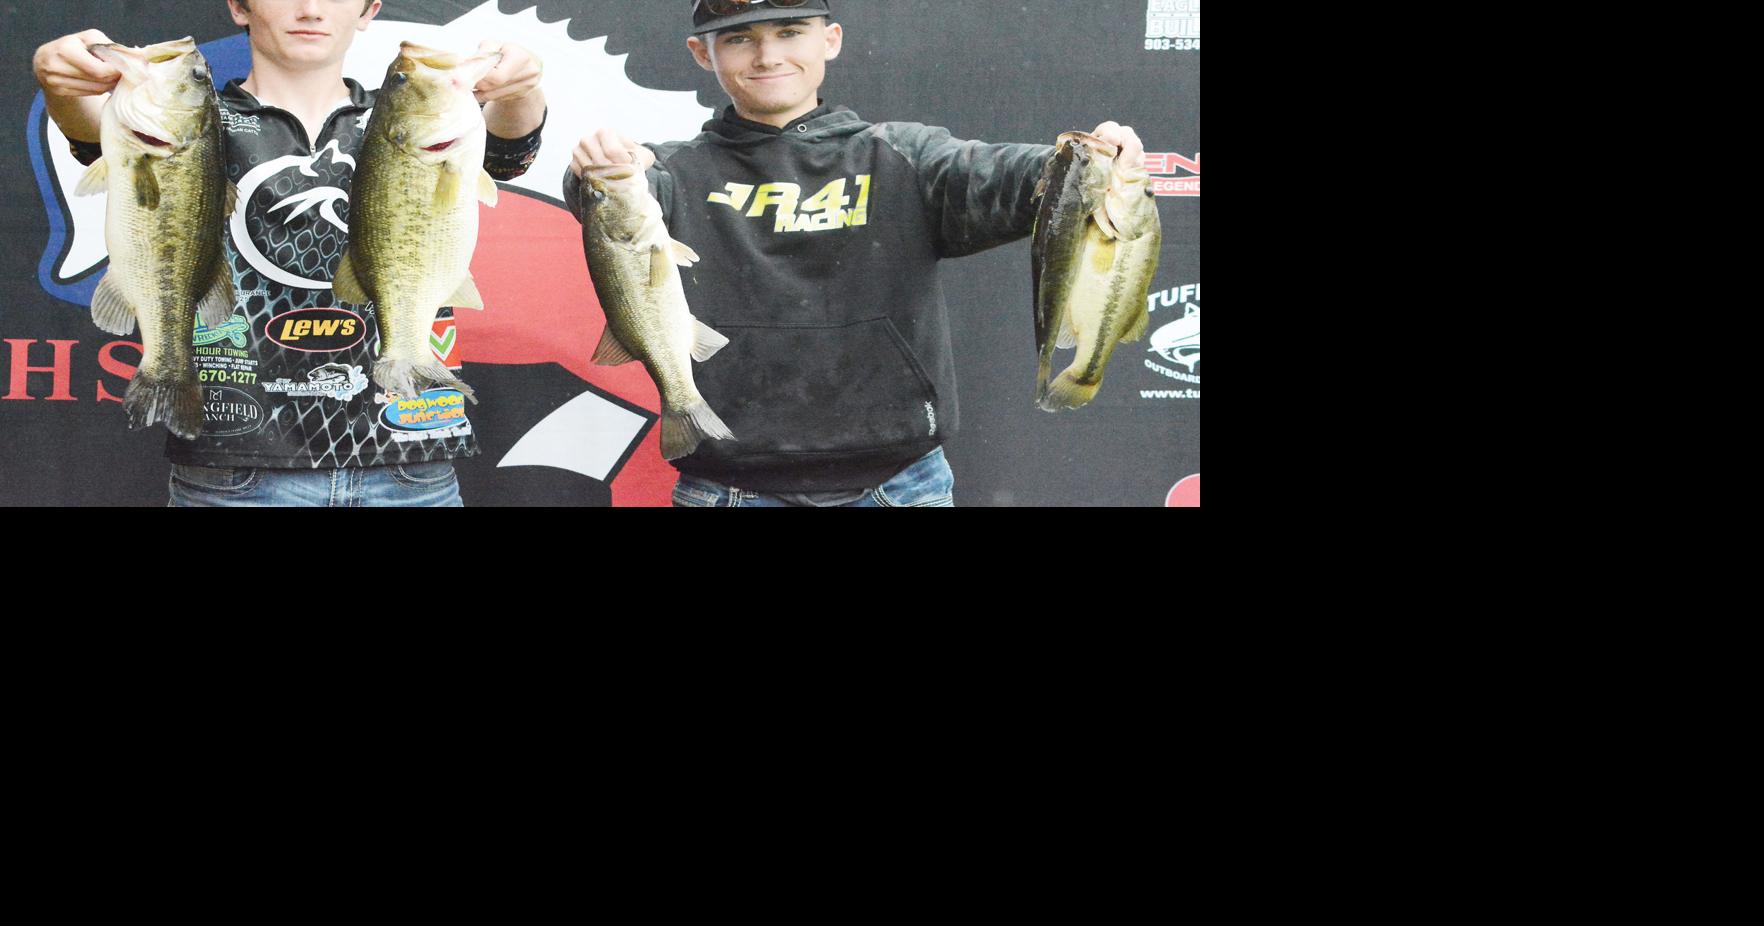 High school fishing: Four local teams vie for title